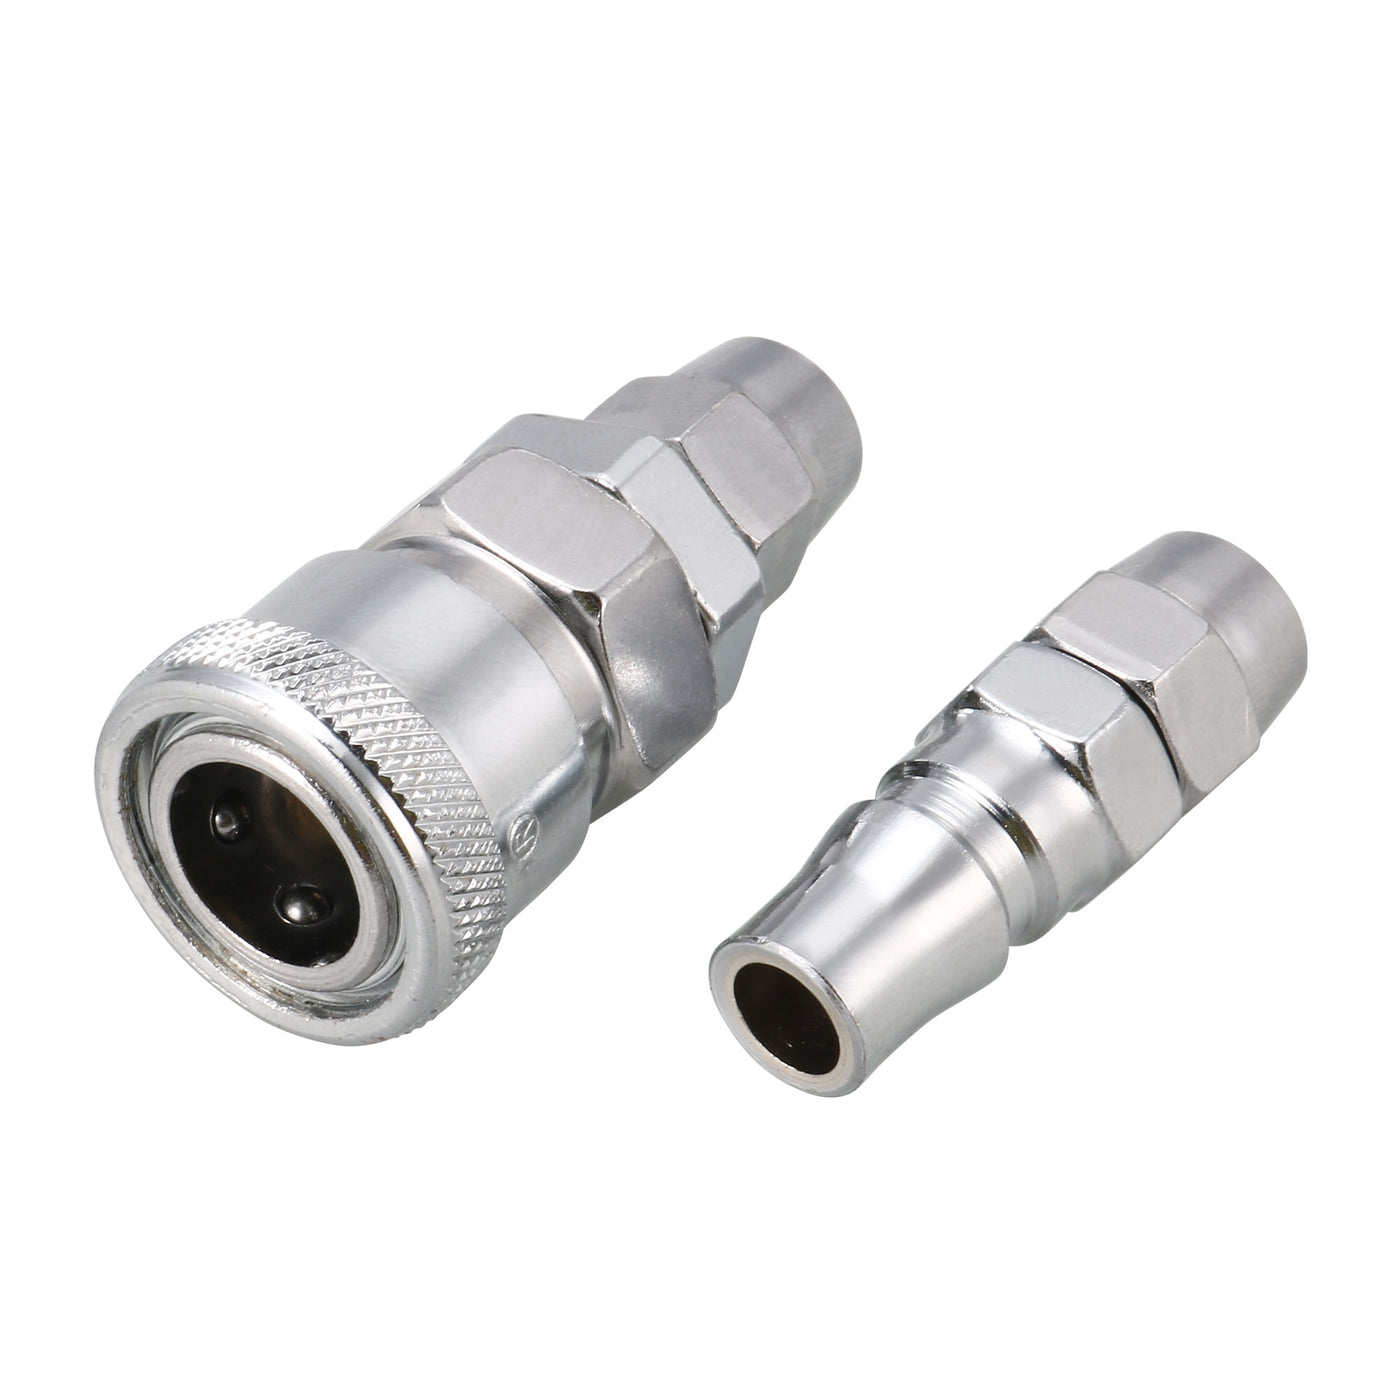 uxcell Uxcell 5mm x 8mm Pneumatic Air Hose Quick Fitting Connector Coupler Connector Adapter